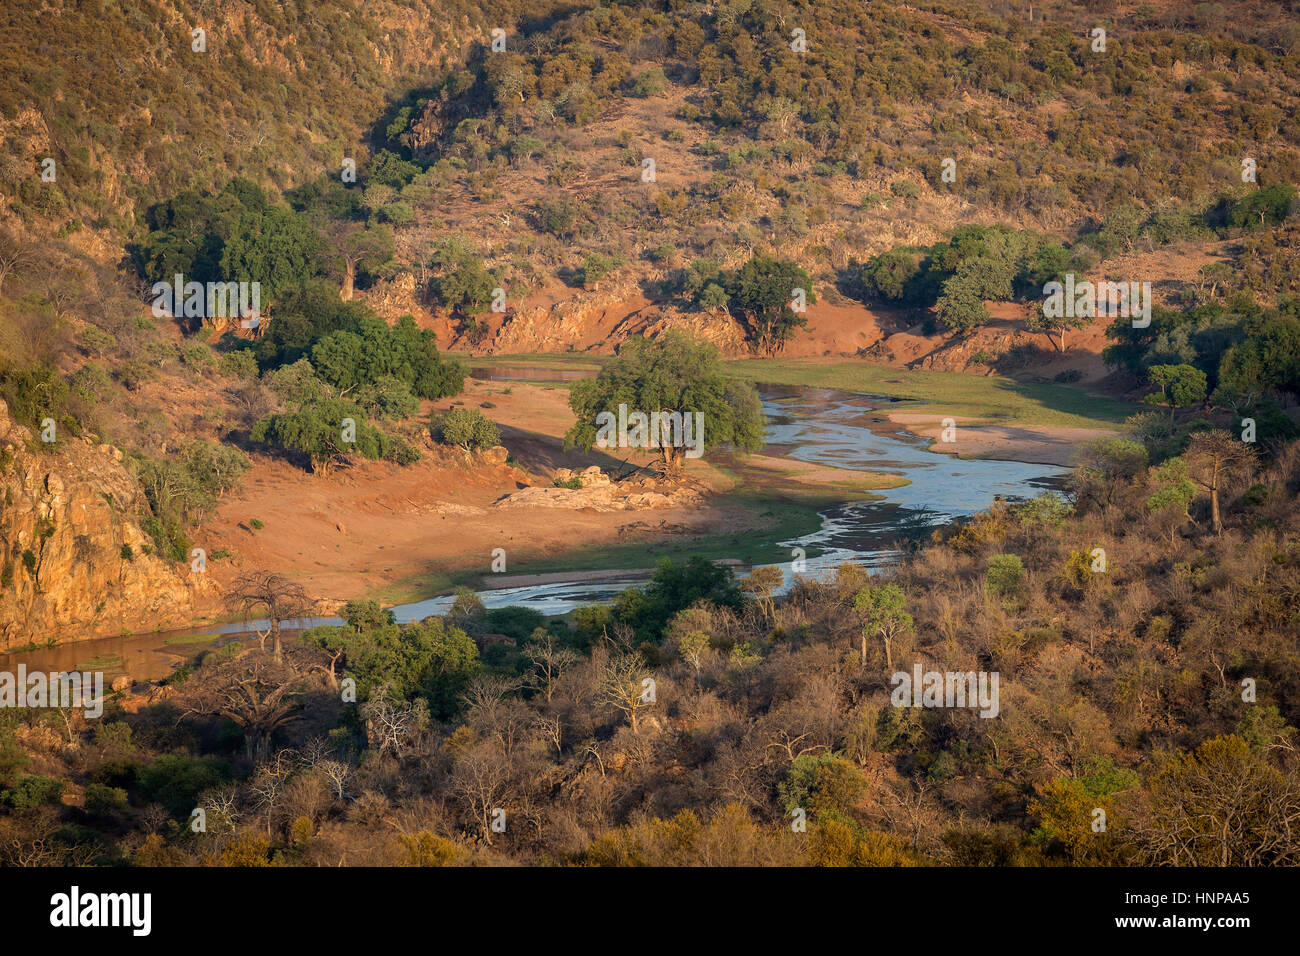 Luvuvhu Fiume, Parco Nazionale Kruger, Sud Africa Foto Stock